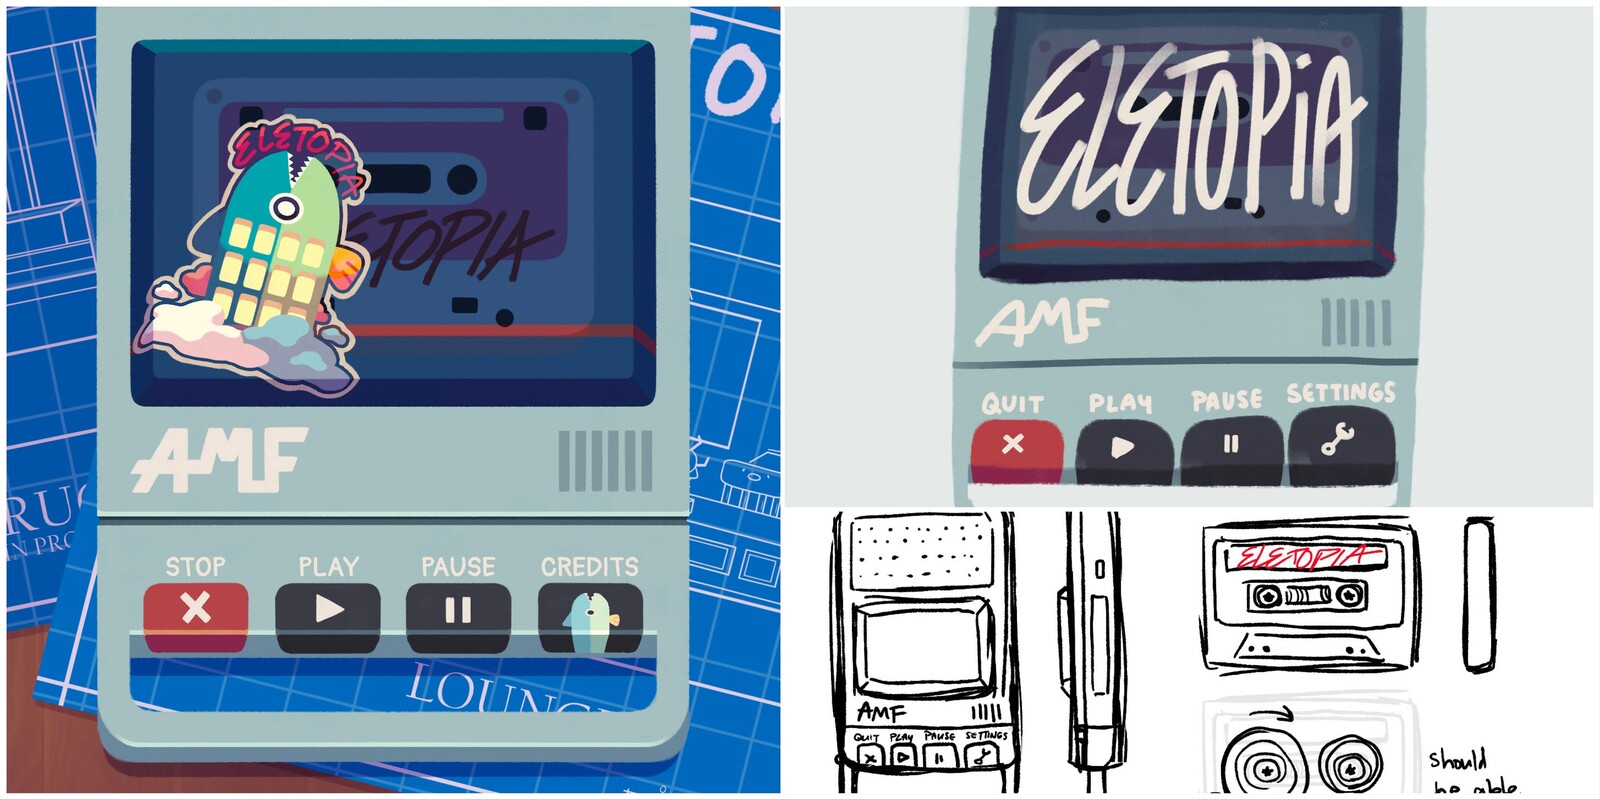 Top right was the initial sketch for the title screen. Originally meant to be 3D, so I made a turnaround for the cassette player.